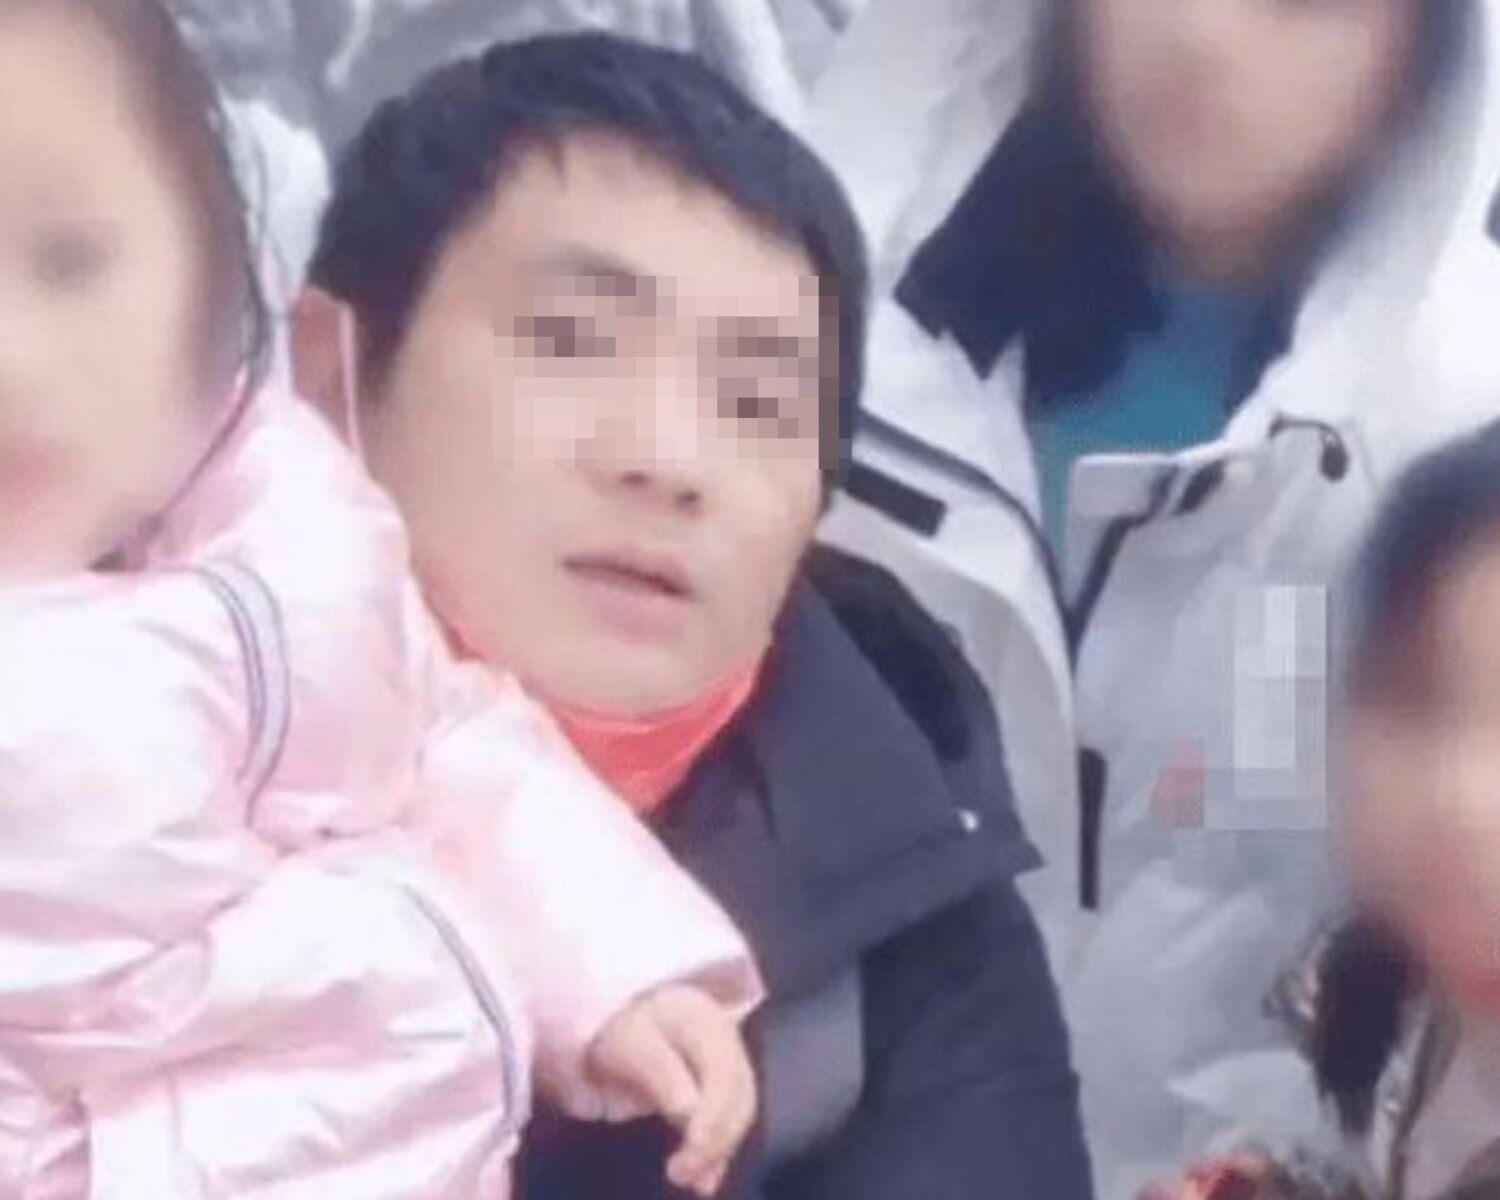 Shocking discovery of infidelity after 16 years shakes Chinese family